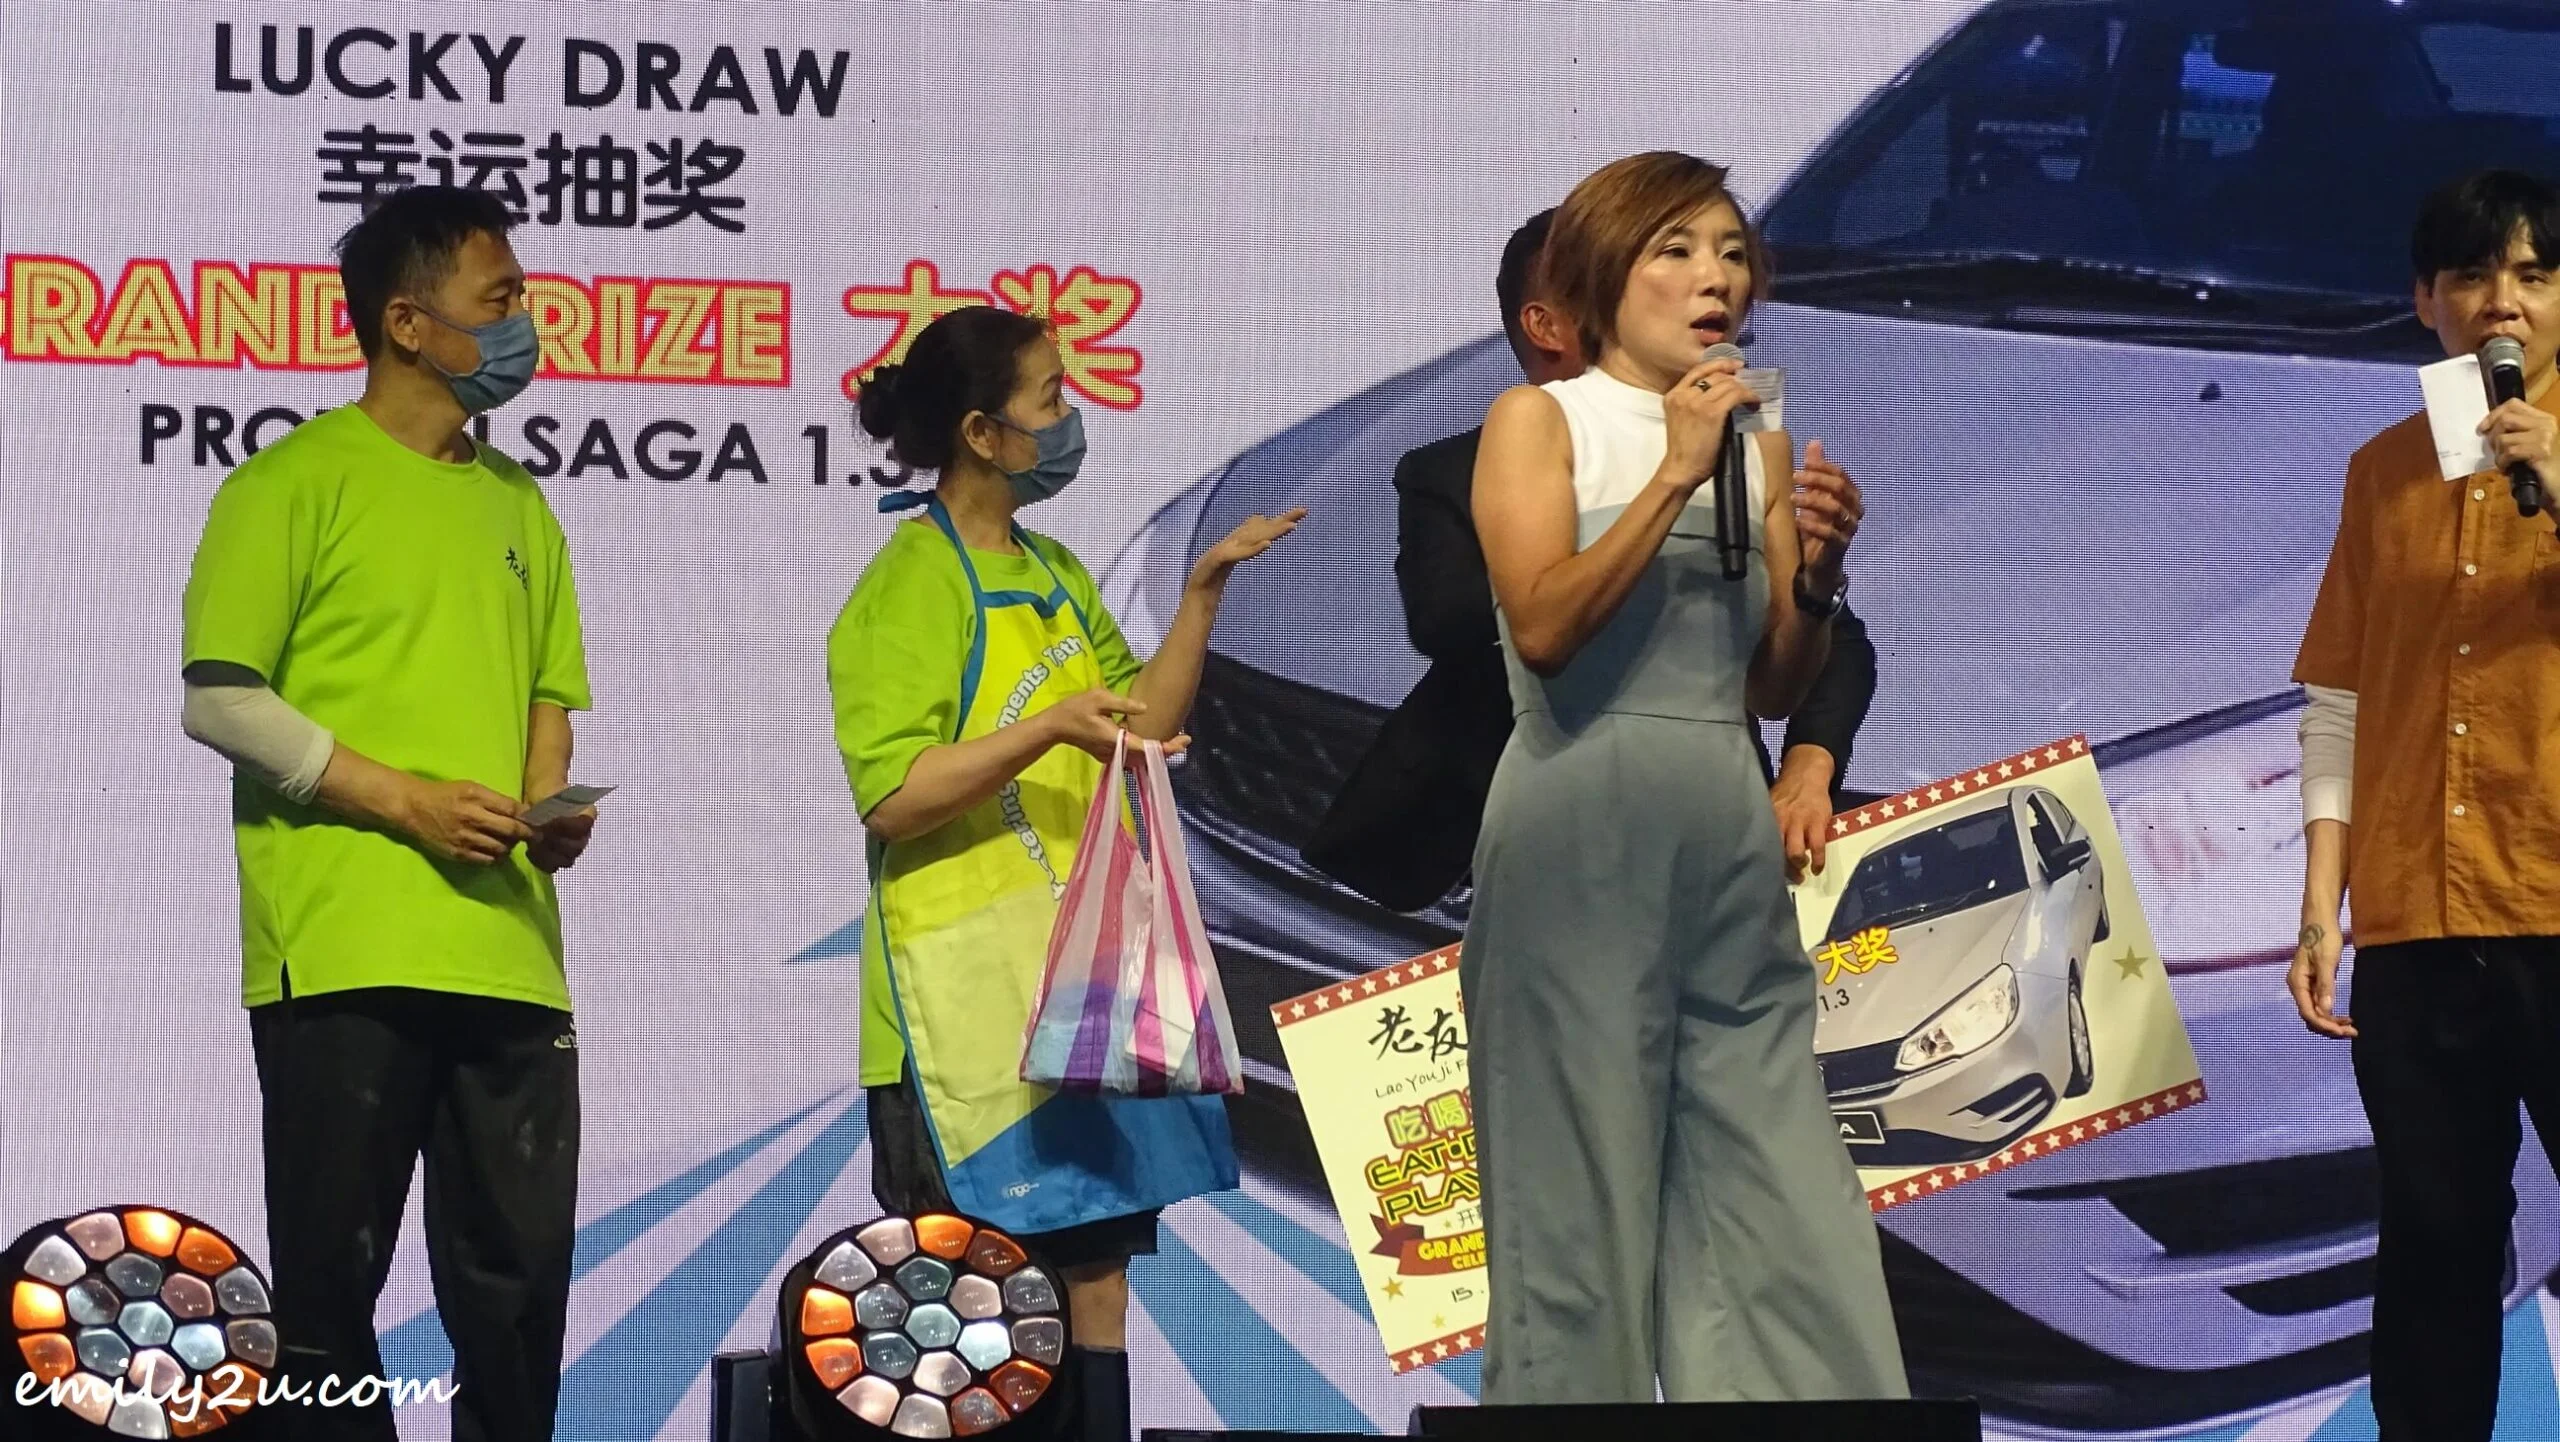 the couple with their large back of lucky draw entries, while waiting for their winning status to be verified